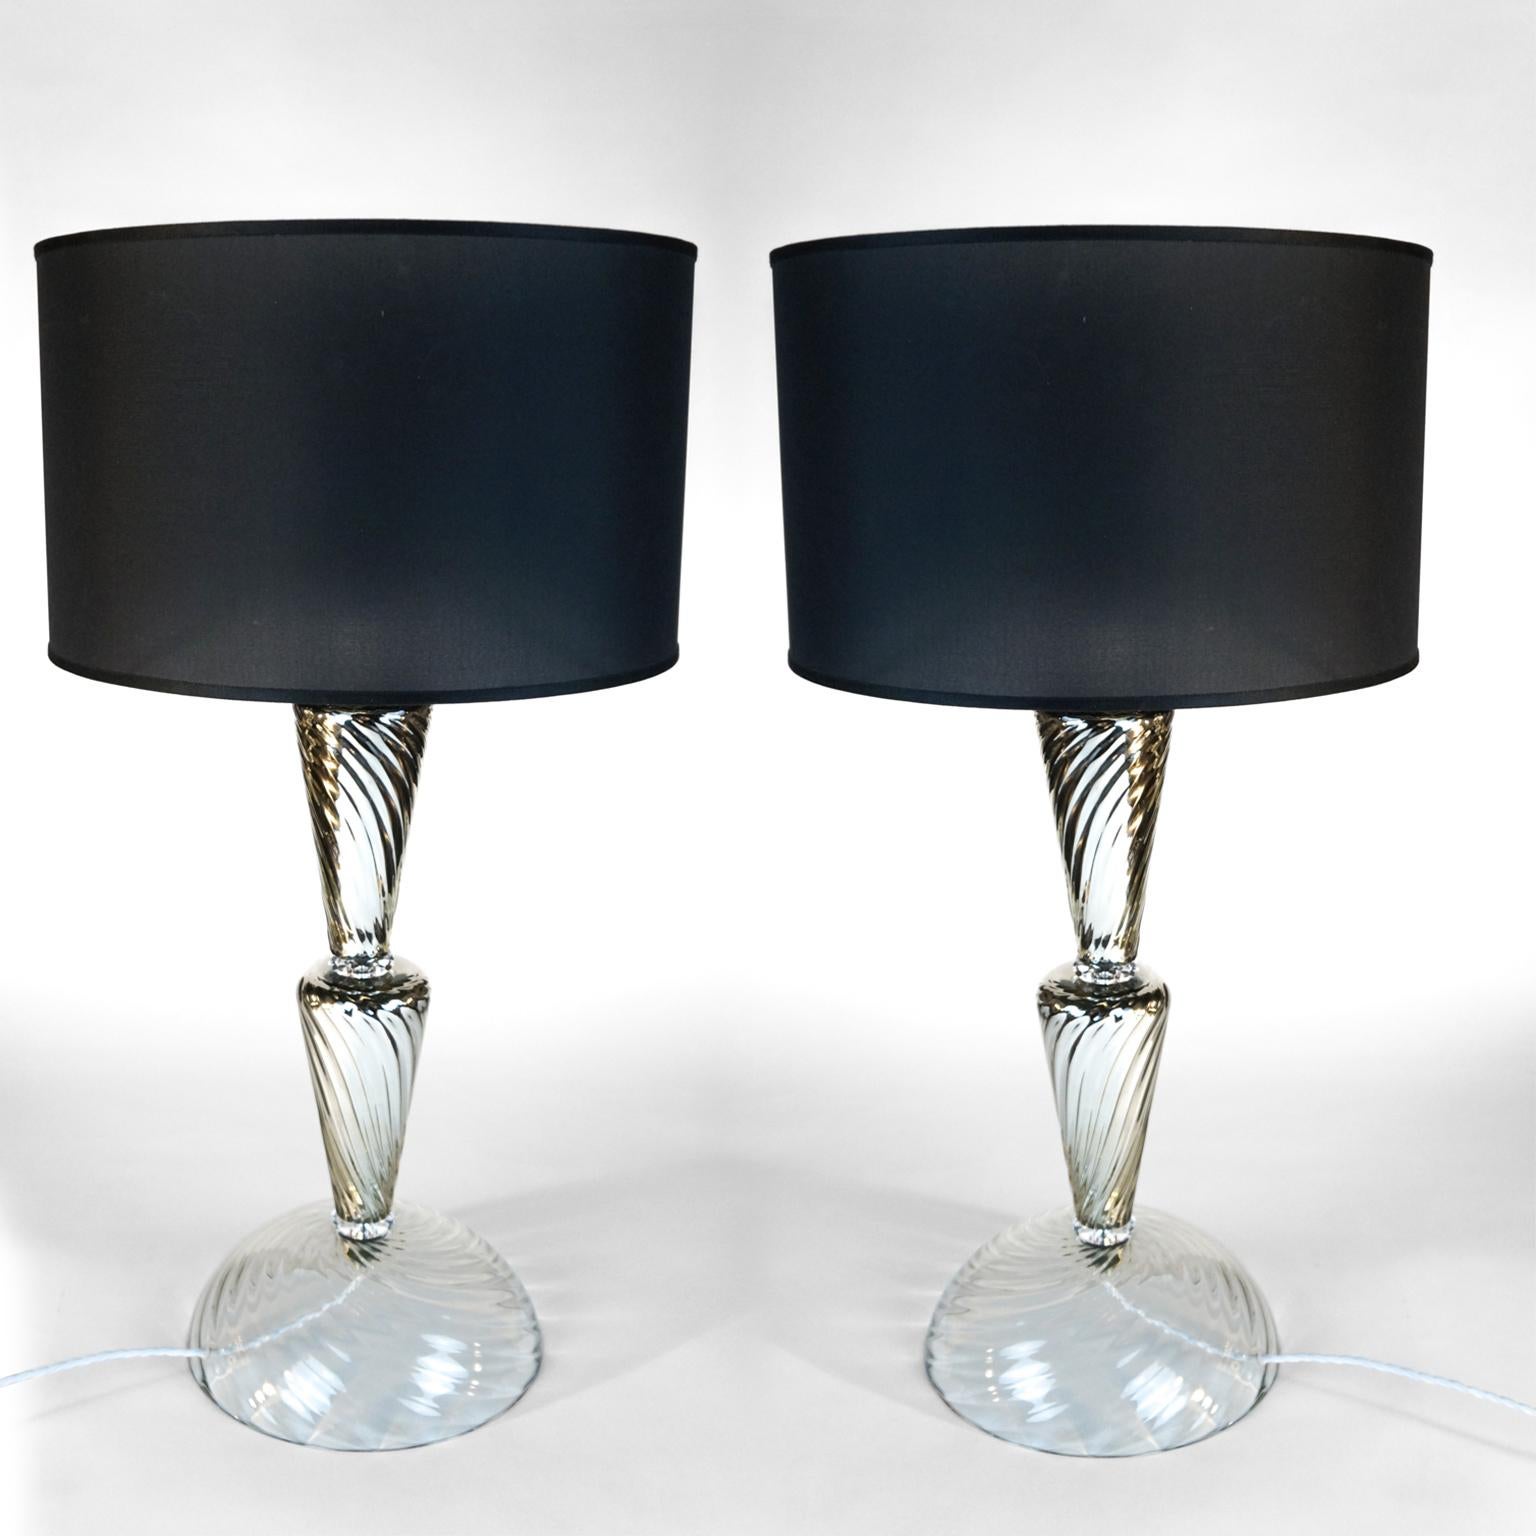 Hand-Crafted Alberto Donà Silver Crystal Pair of Italian Murano Glass Table Lamps, 1994s For Sale